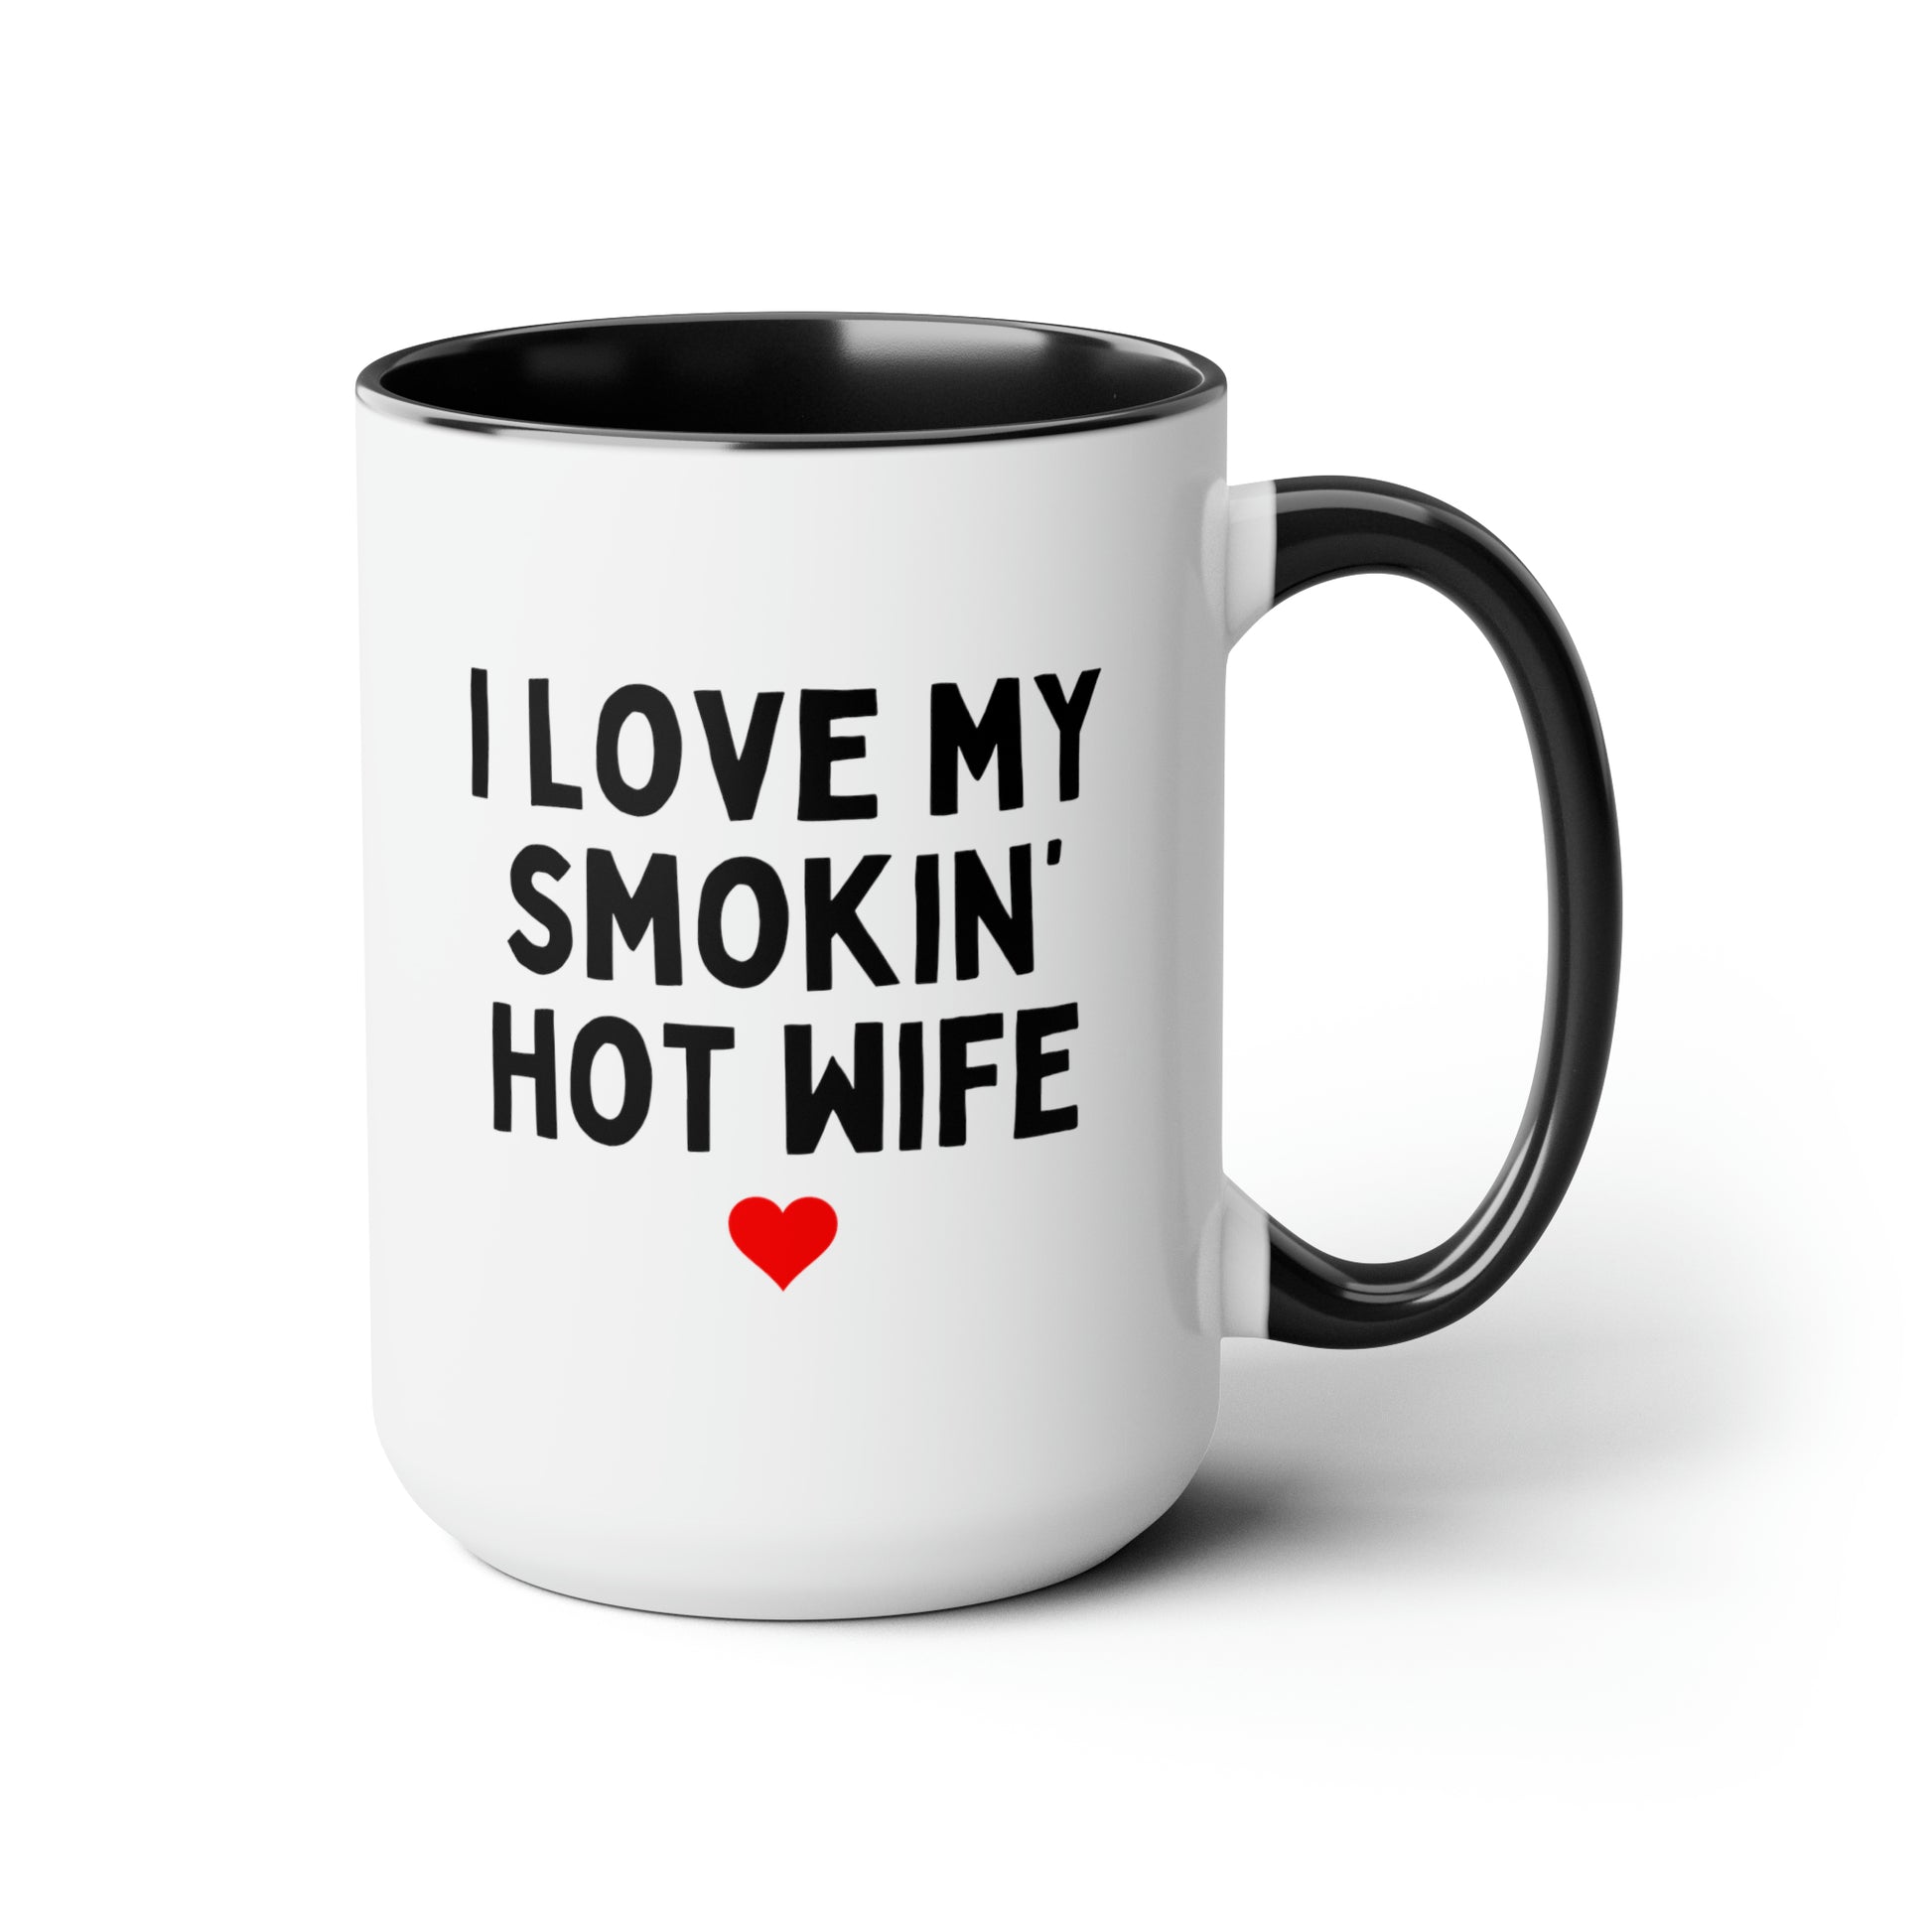 I Love My Smokin Hot Wife 15oz white with black accent funny large coffee mug gift for wife fiance valentines day anniversary waveywares wavey wares wavywares wavy wares